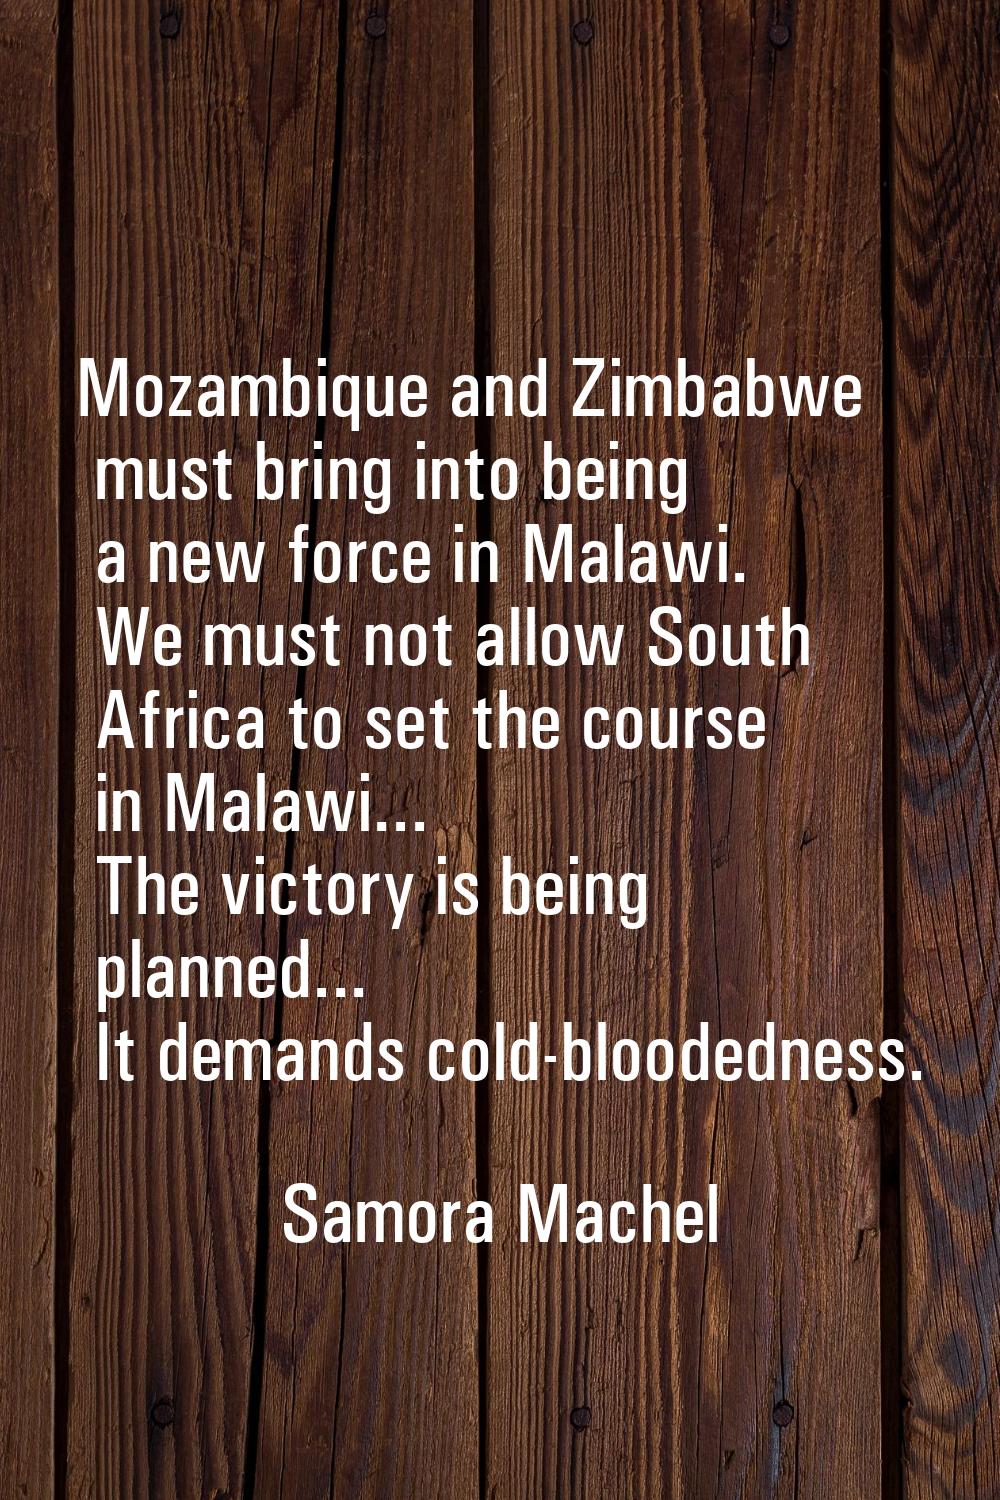 Mozambique and Zimbabwe must bring into being a new force in Malawi. We must not allow South Africa